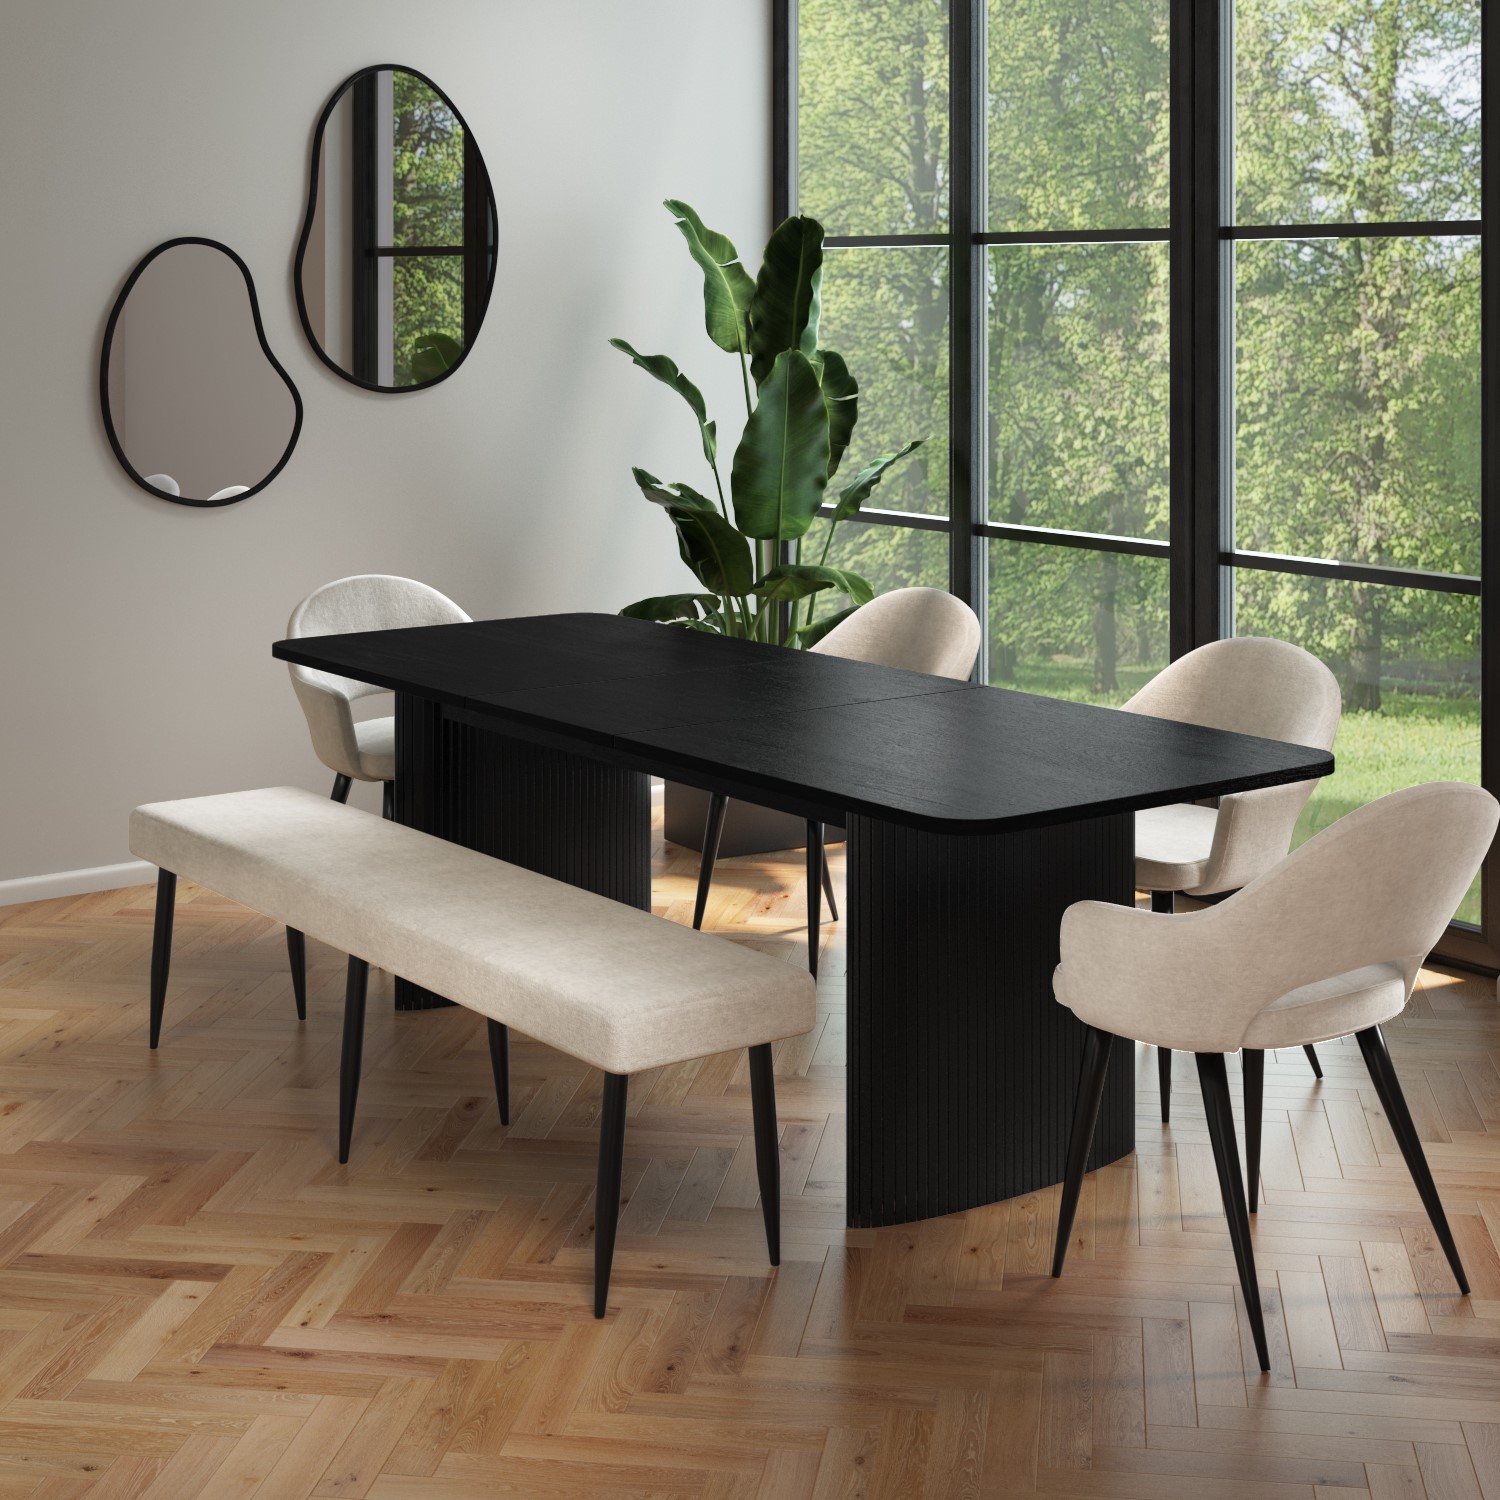 Photo of Black oak extendable dining set with 4 beige fabric dining chairs and 1 dining bench - seats 6 - jarel